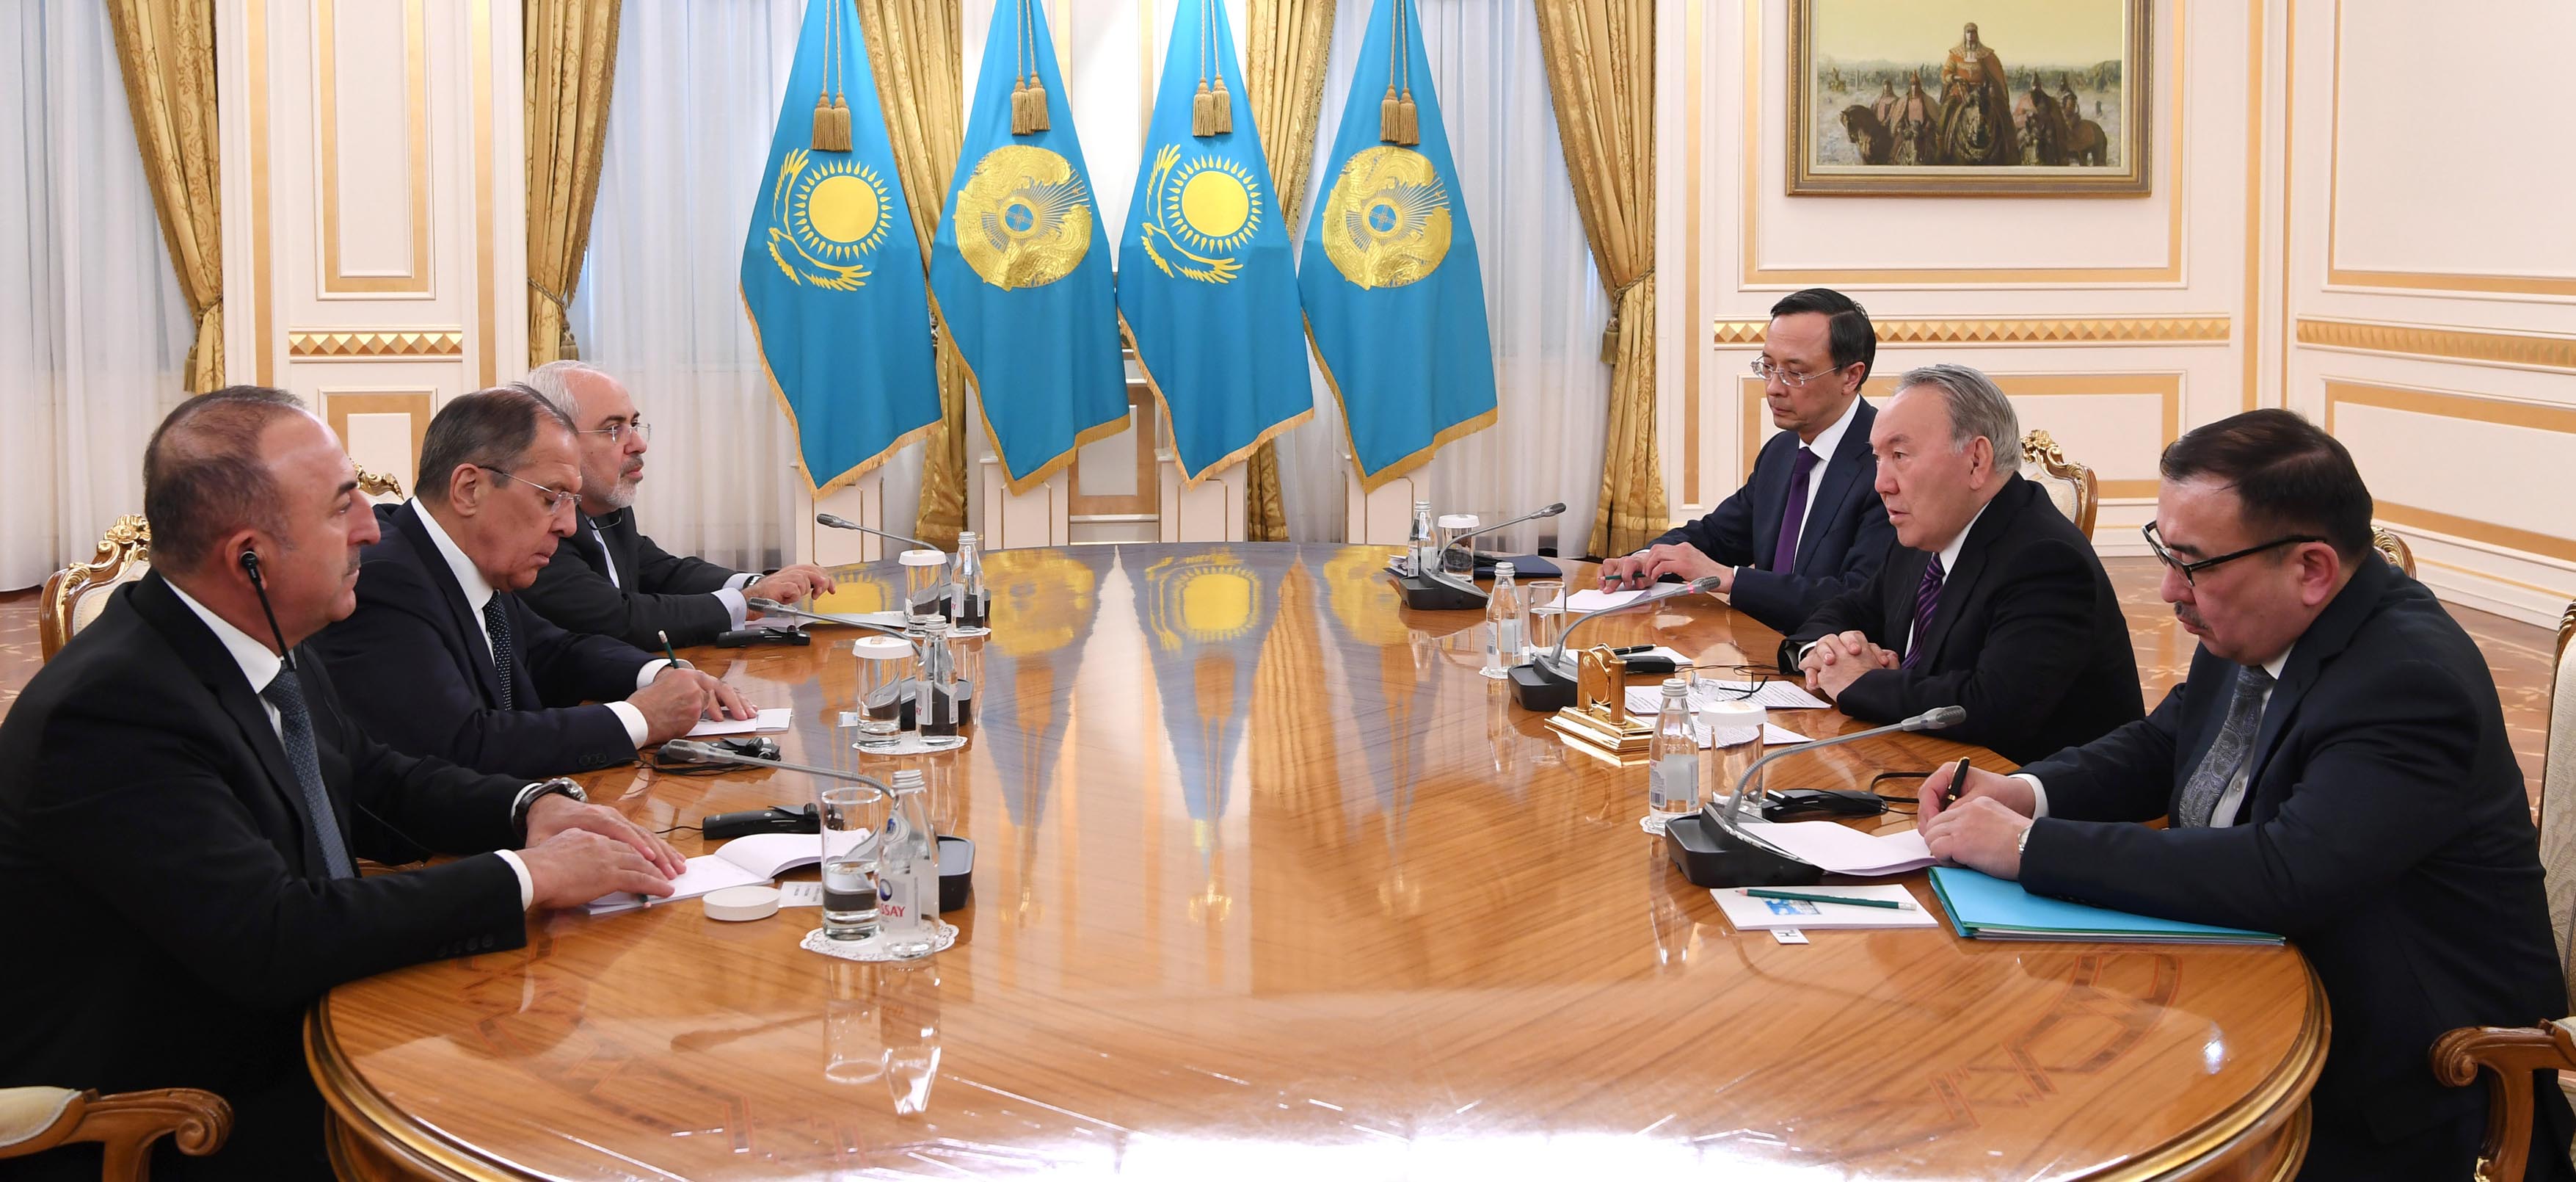 Kazakh President receives Foreign Ministers of Guaranteeing Powers in the Astana Process on Syria